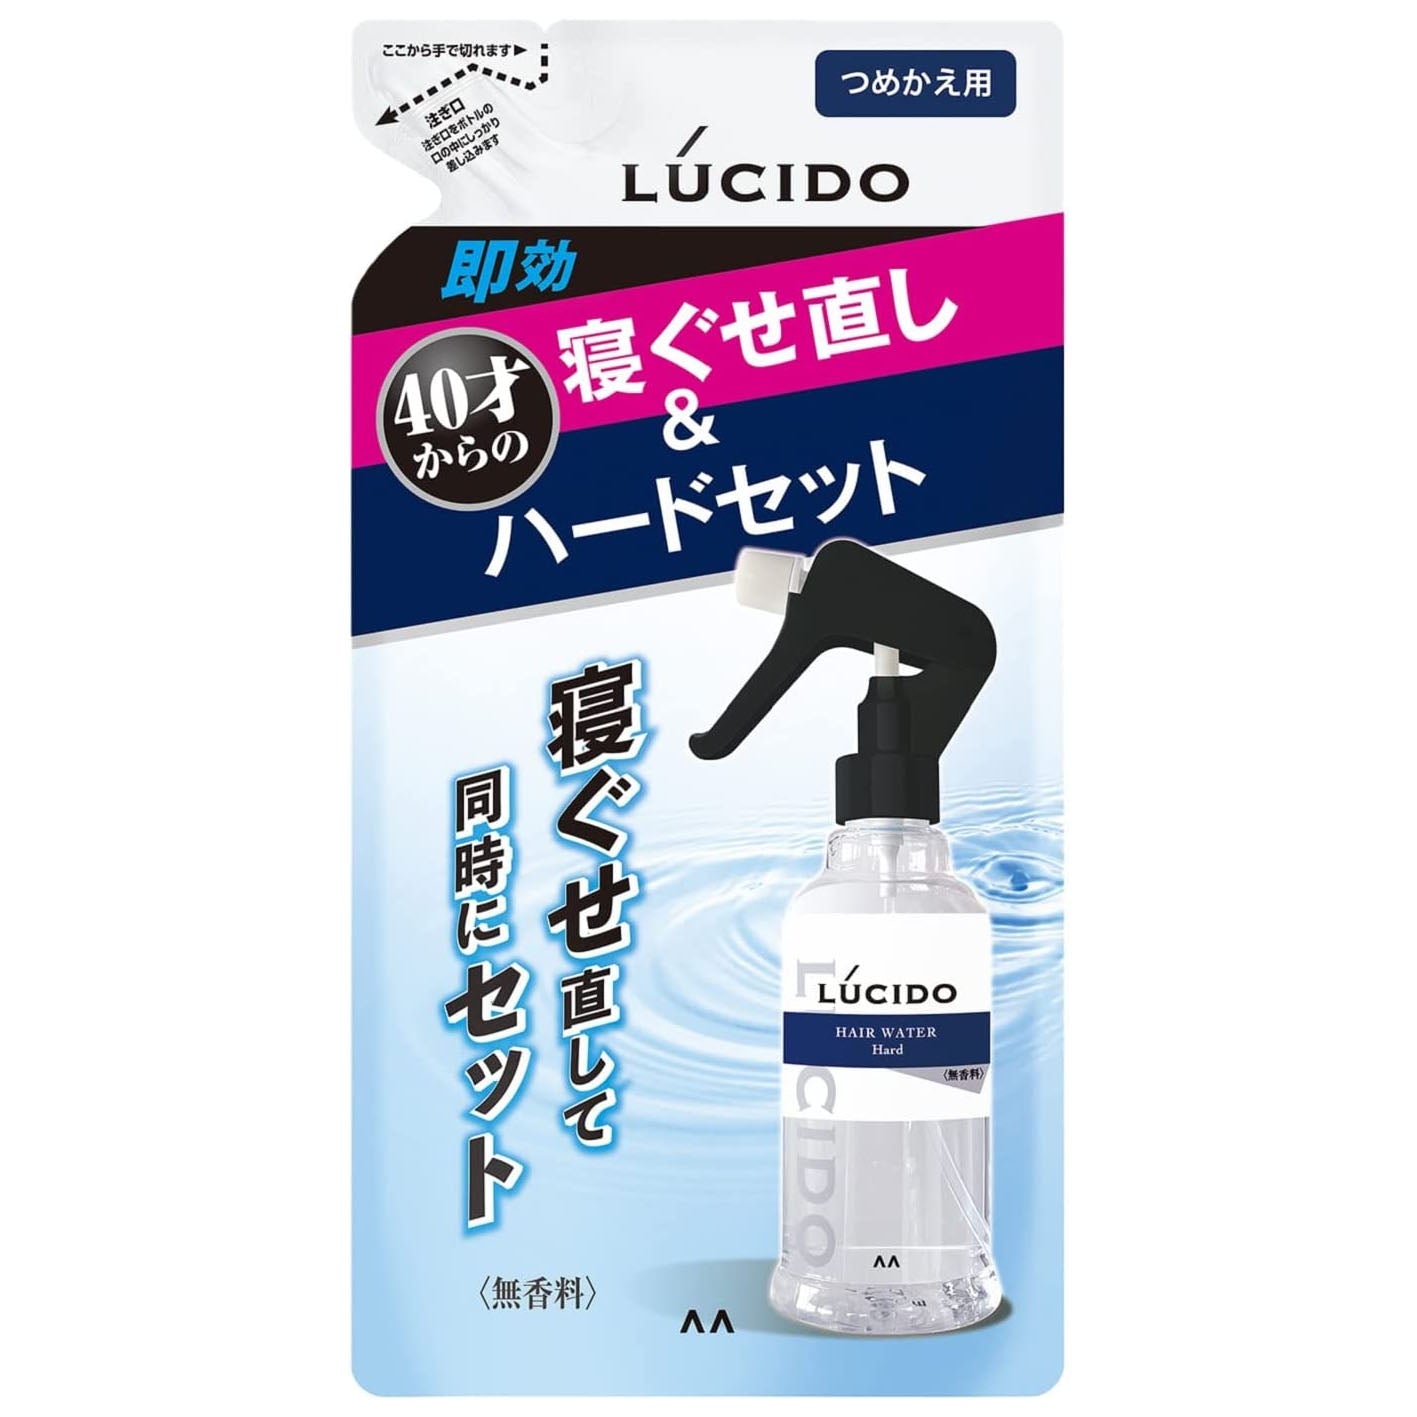 Lucido Restoration & Styling Water Hard 230ml - Refill - Harajuku Culture Japan - Japanease Products Store Beauty and Stationery